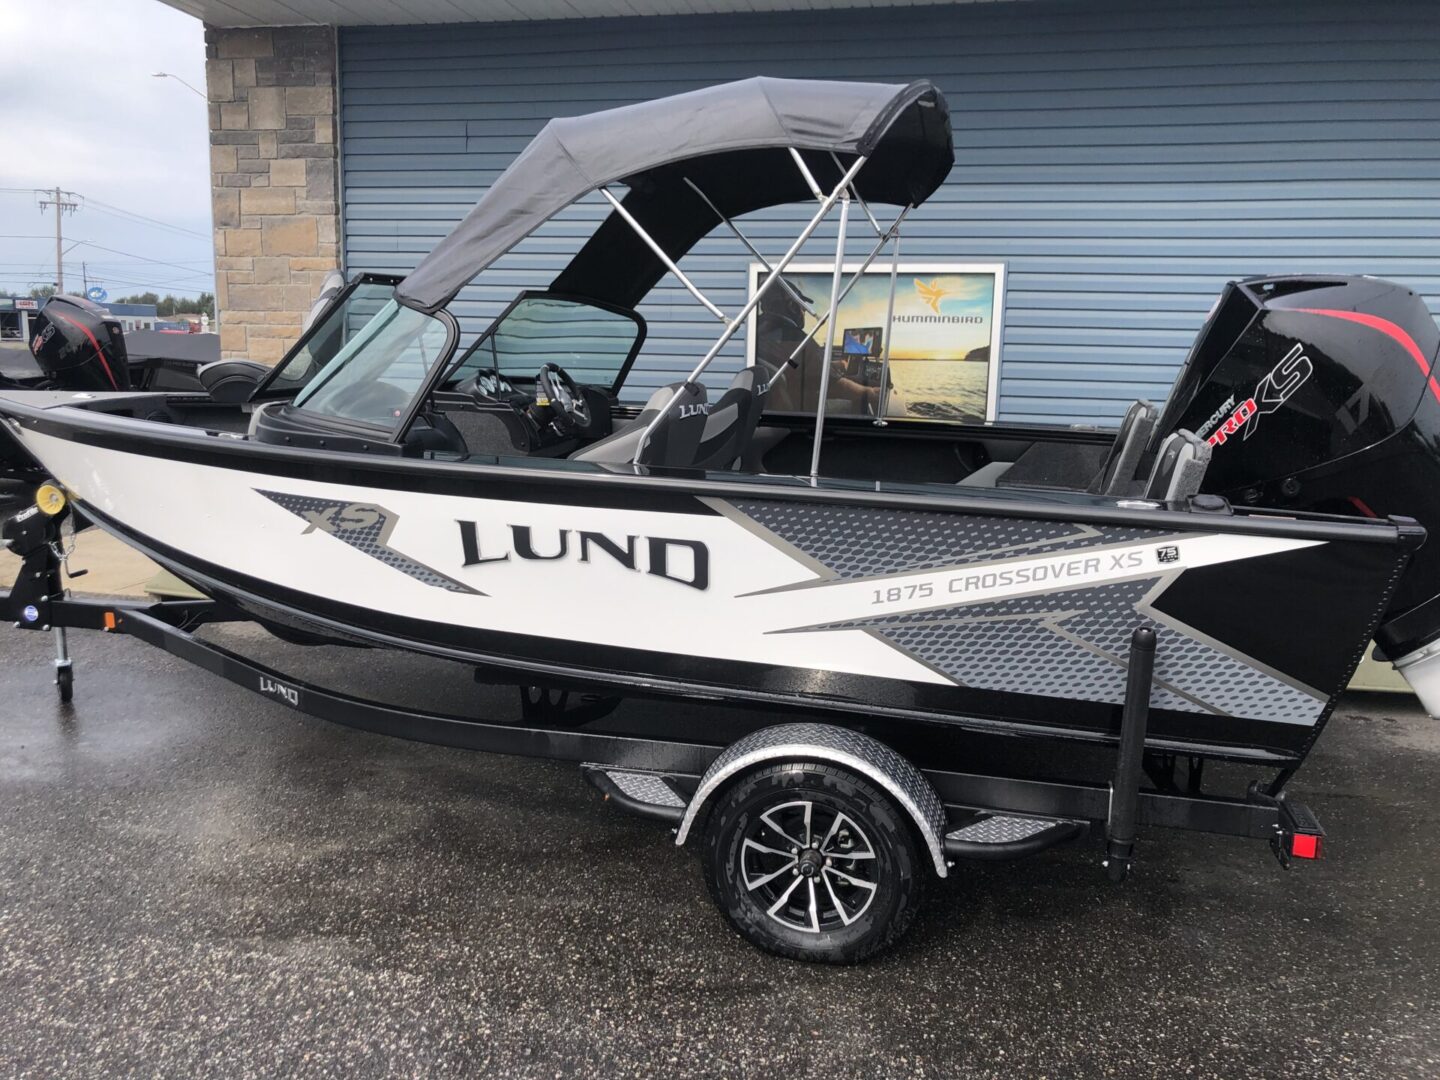 Lund white gray and black boat